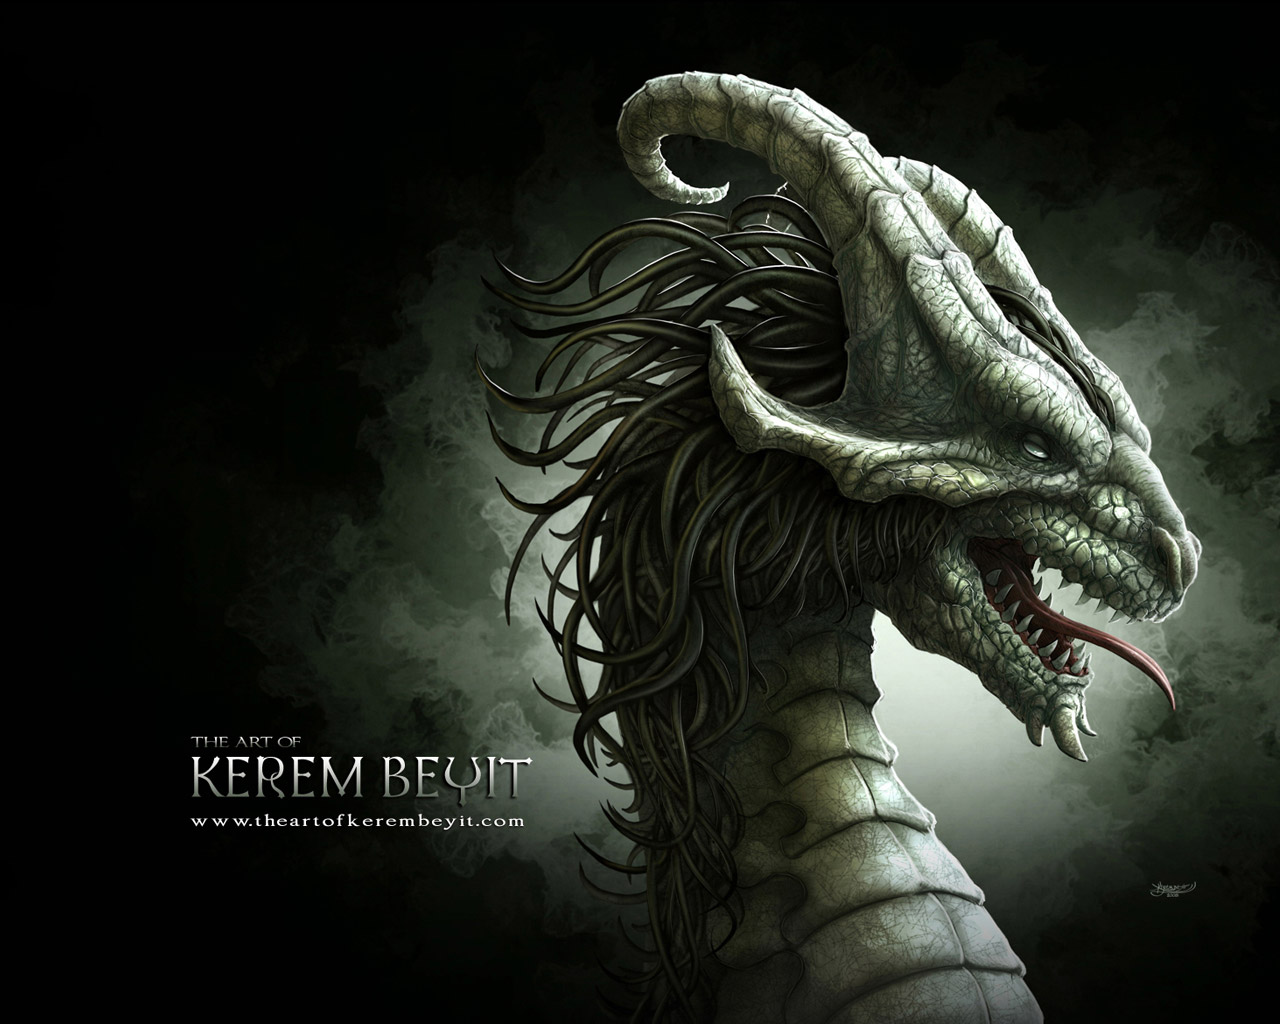 black serpent, snake, dragon, photo, wallpapers for desktop, download free, without payment